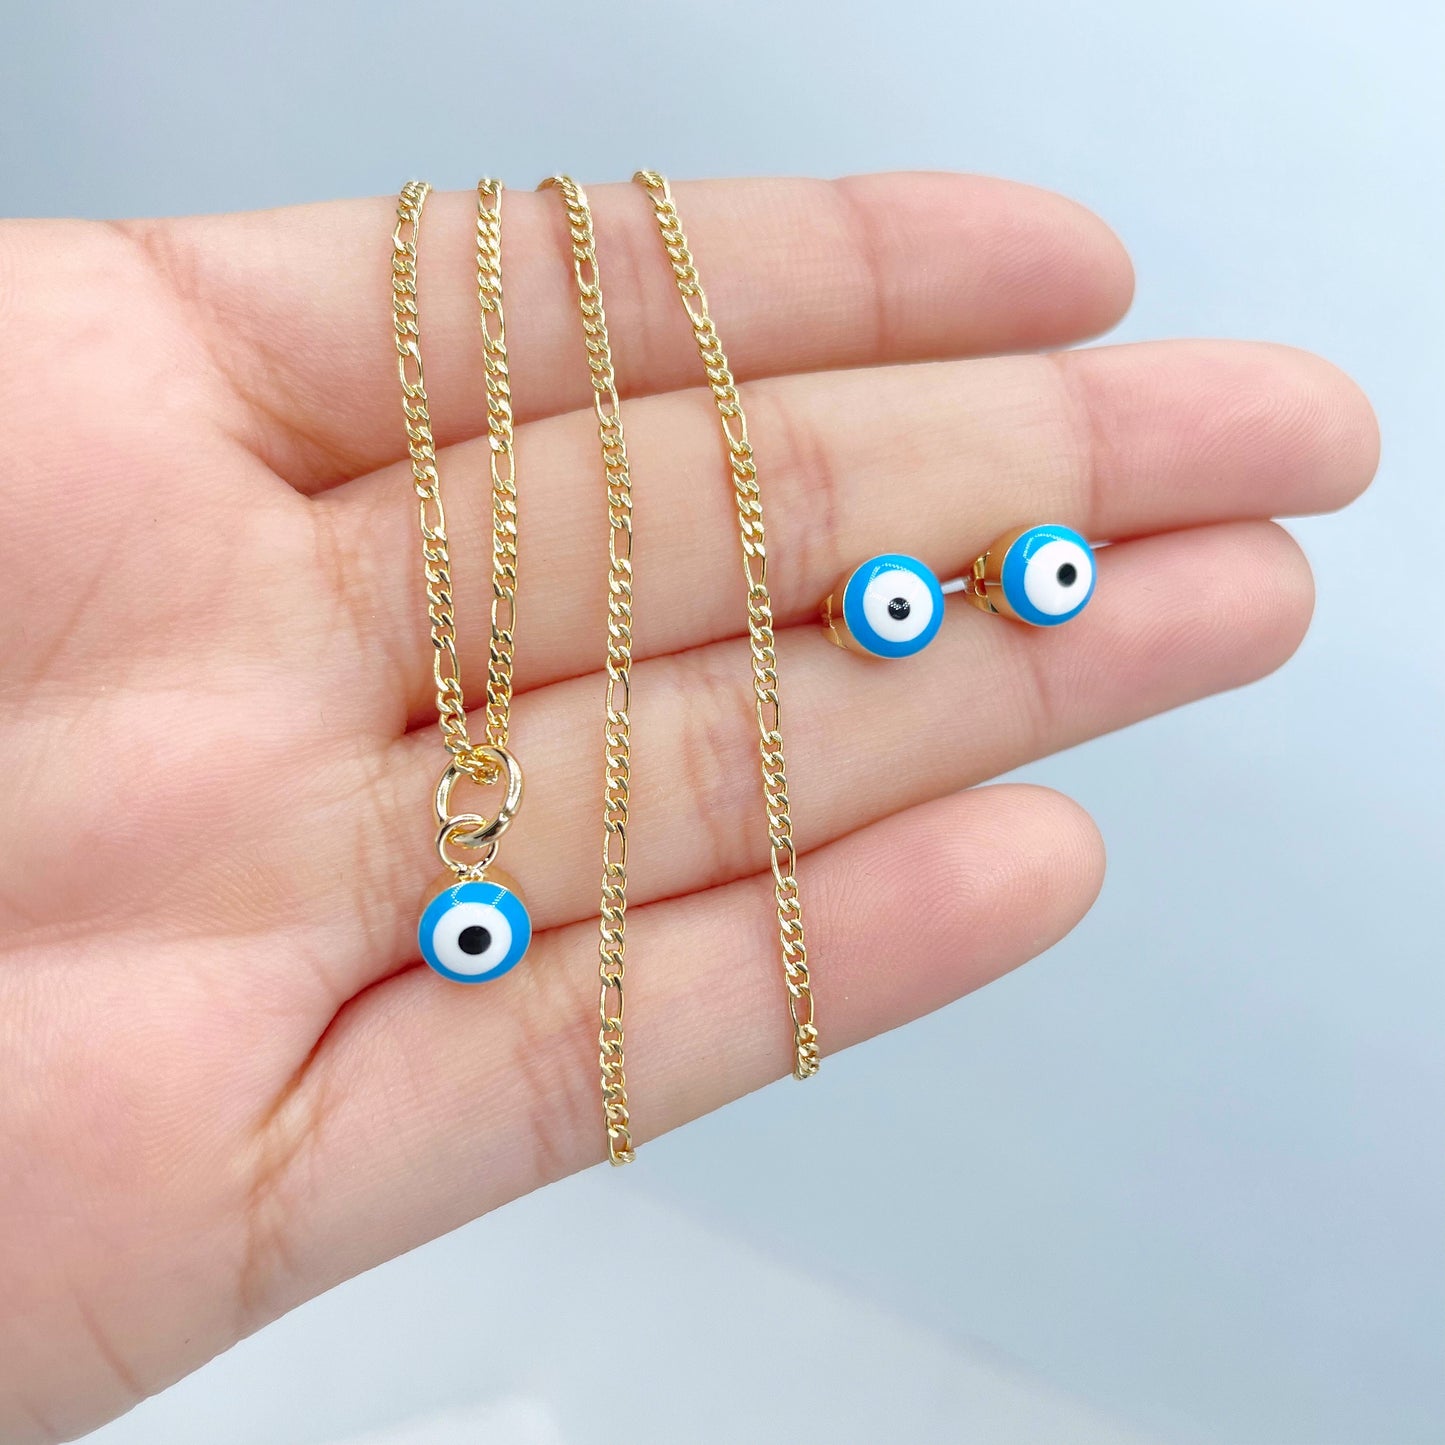 18k Gold Filled 1mm Figaro Link Dainty Chain, Light Blue Evil Eyes Earrings or Charm, Small or Medium, Wholesale Jewelry Making Supplies